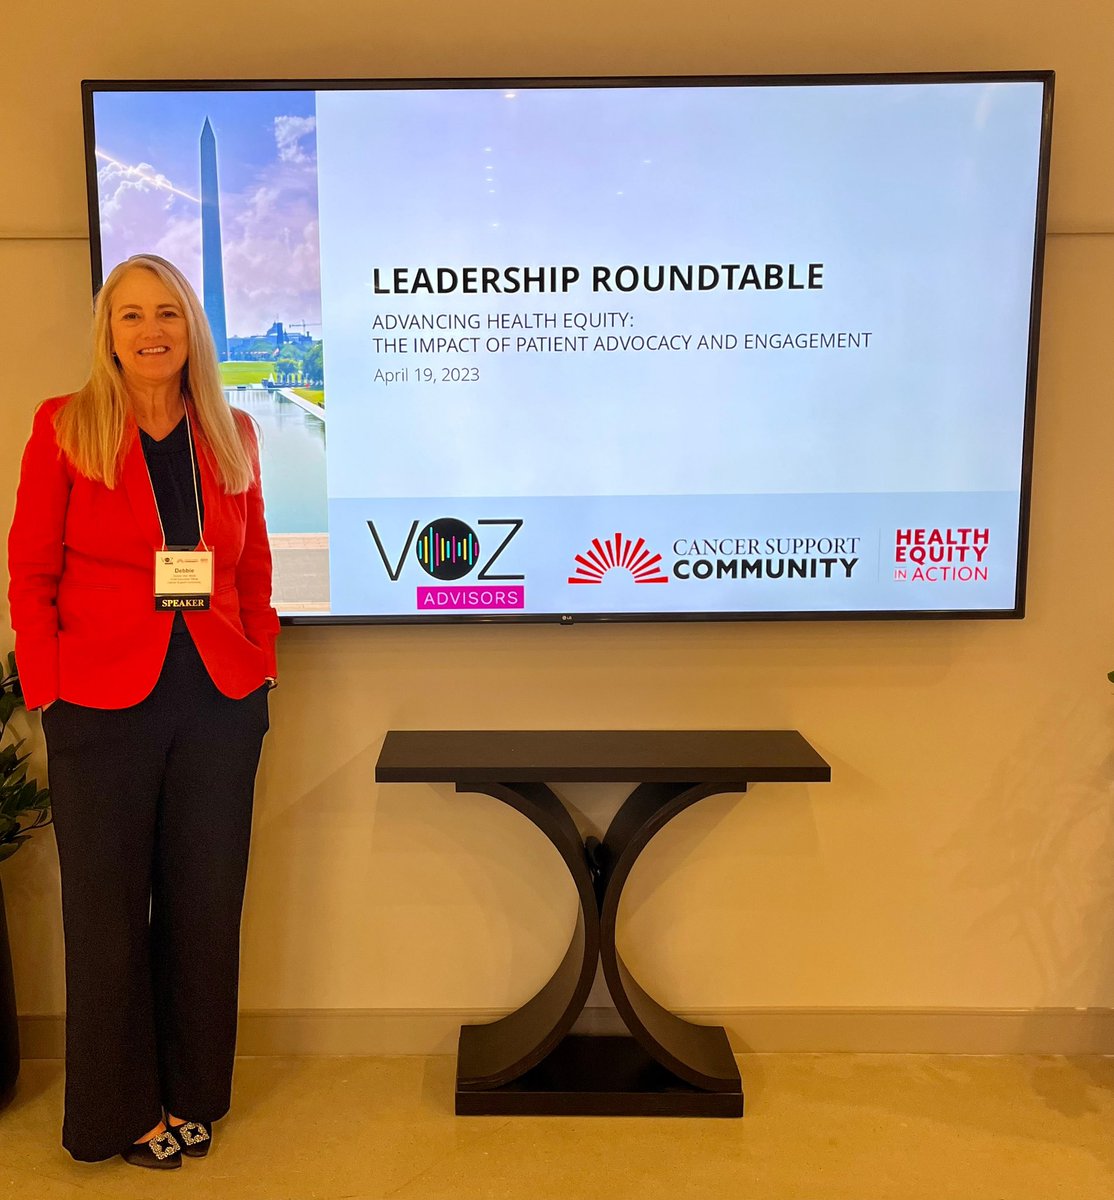 Today, we @CancerSupportHQ and @vozadvisors facilitated a leadership roundtable on Advancing Health Equity: The Impact of Patient Advocacy & Engagement. Discussed and developed actions to drive solution-oriented approaches to advance health equity.